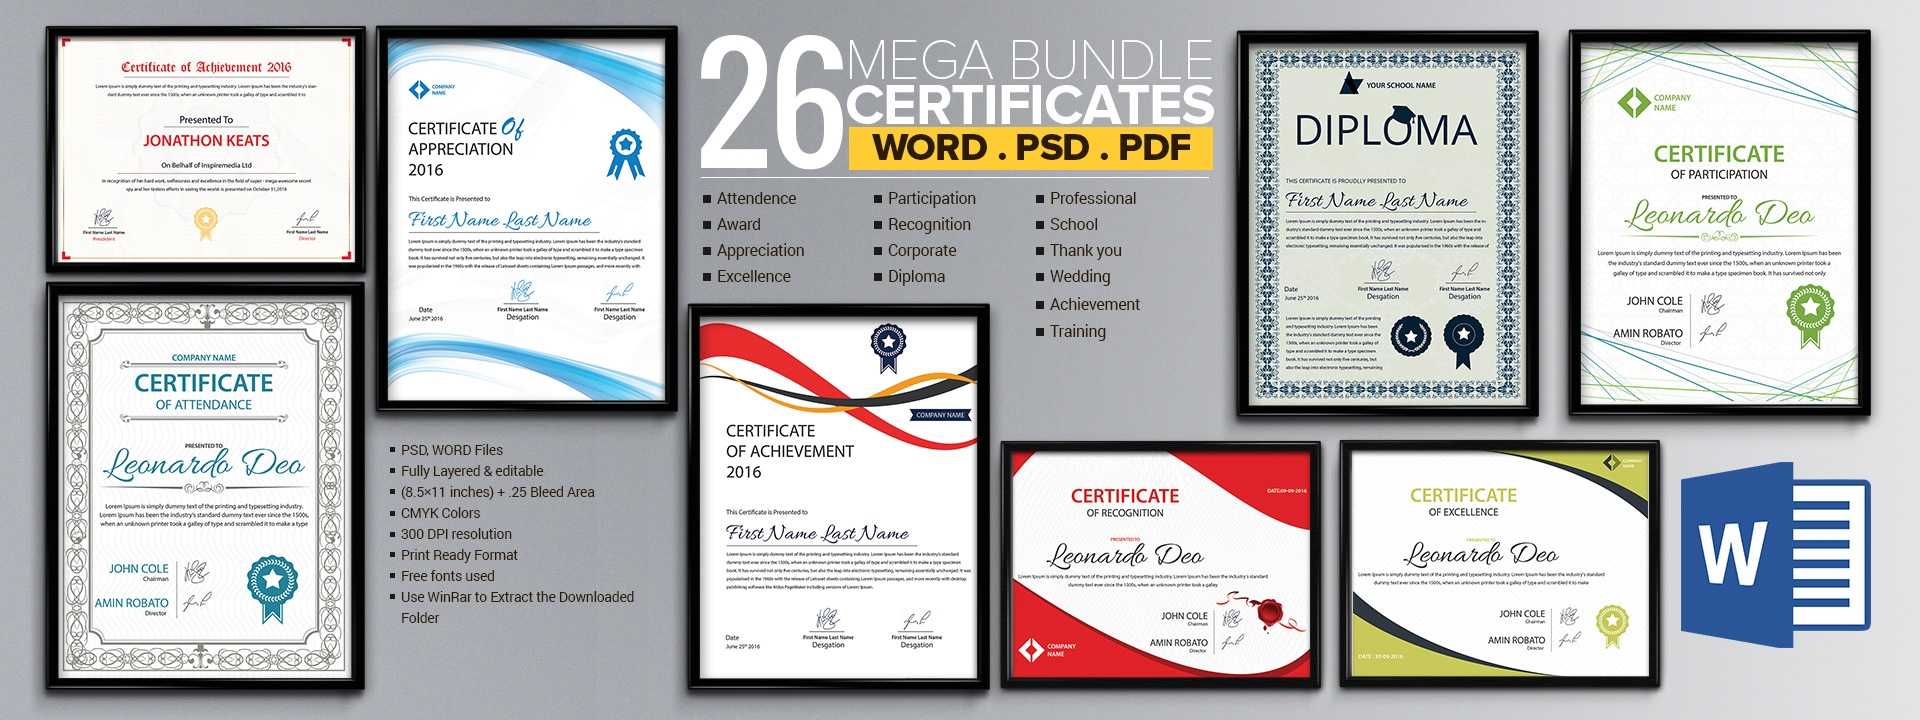 Word Certificate Template – 53+ Free Download Samples Throughout Downloadable Certificate Templates For Microsoft Word